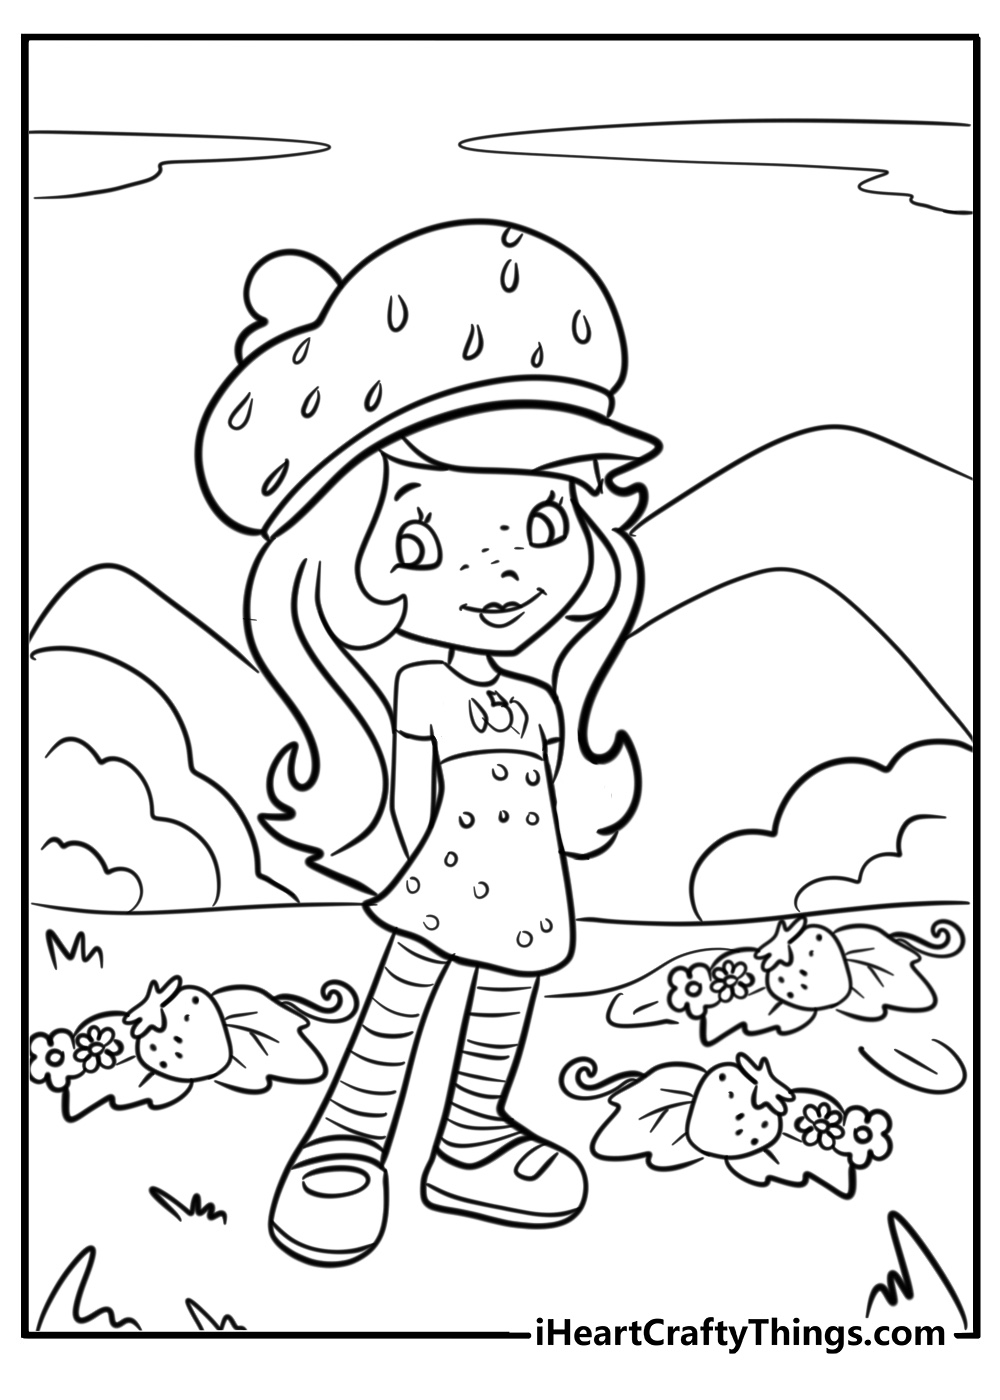 Strawberry shortcake coloring page standing in field